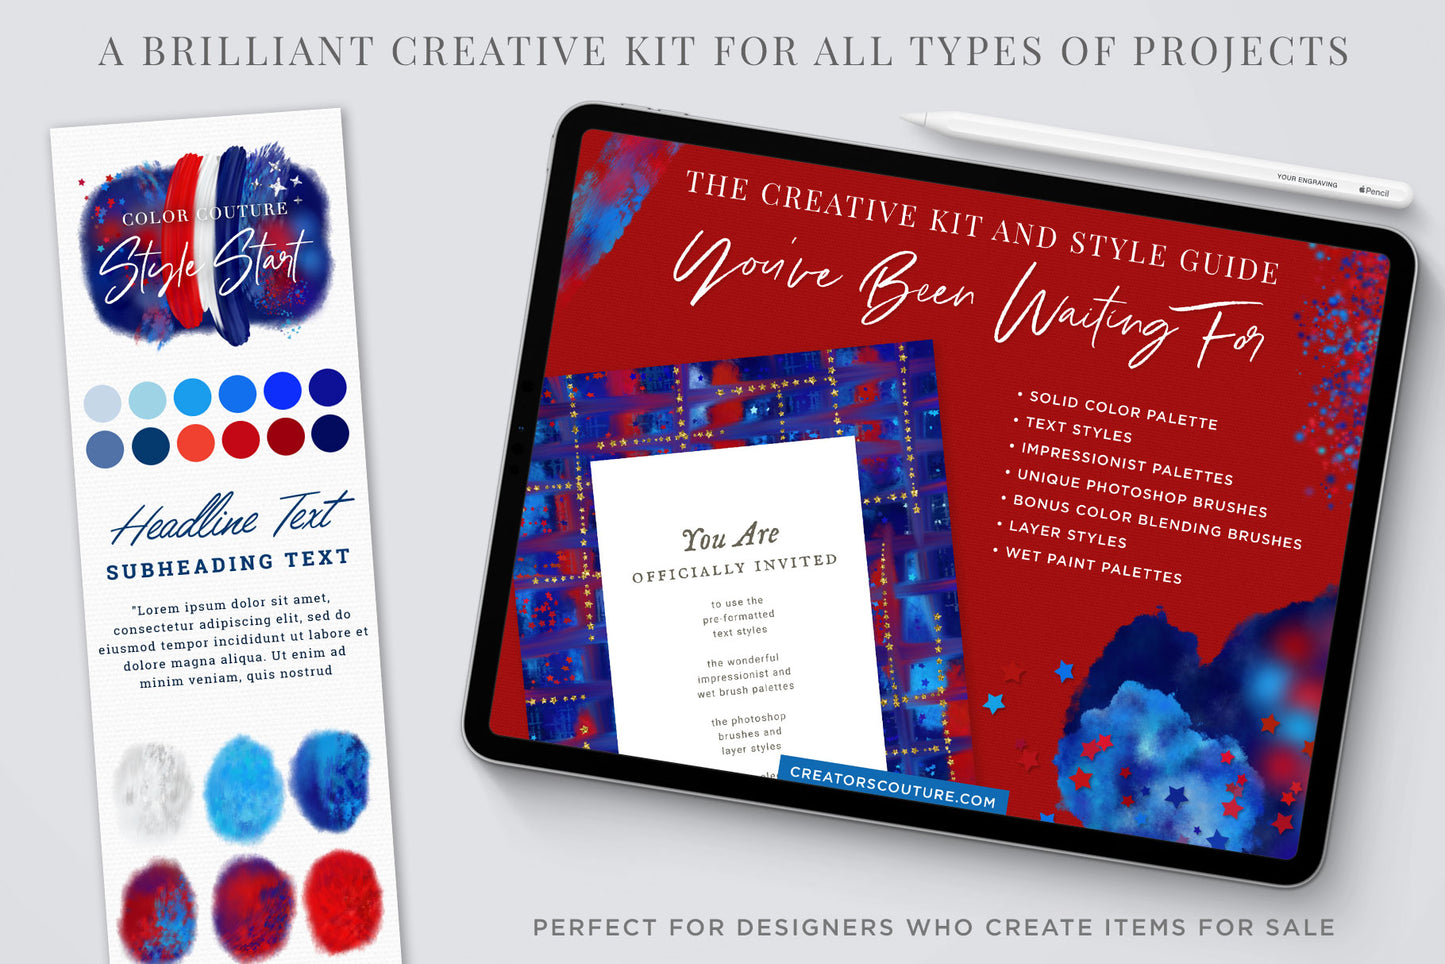 Style Start "Celebration" | Patriotic Creative Kit & Style Guide - Creators Couture